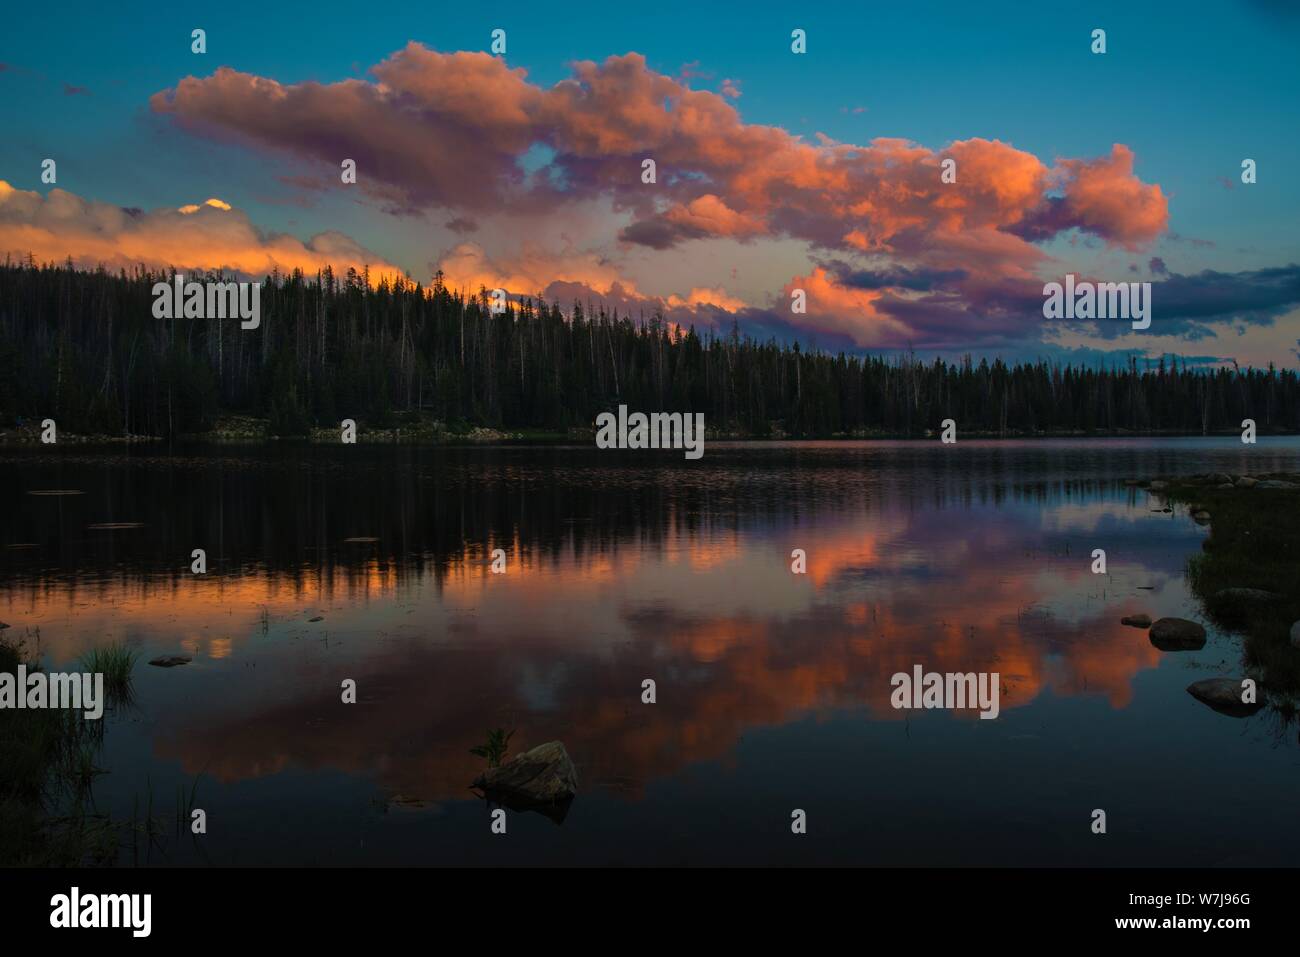 Clouds at sunset reflecting in a lake. Stock Photo